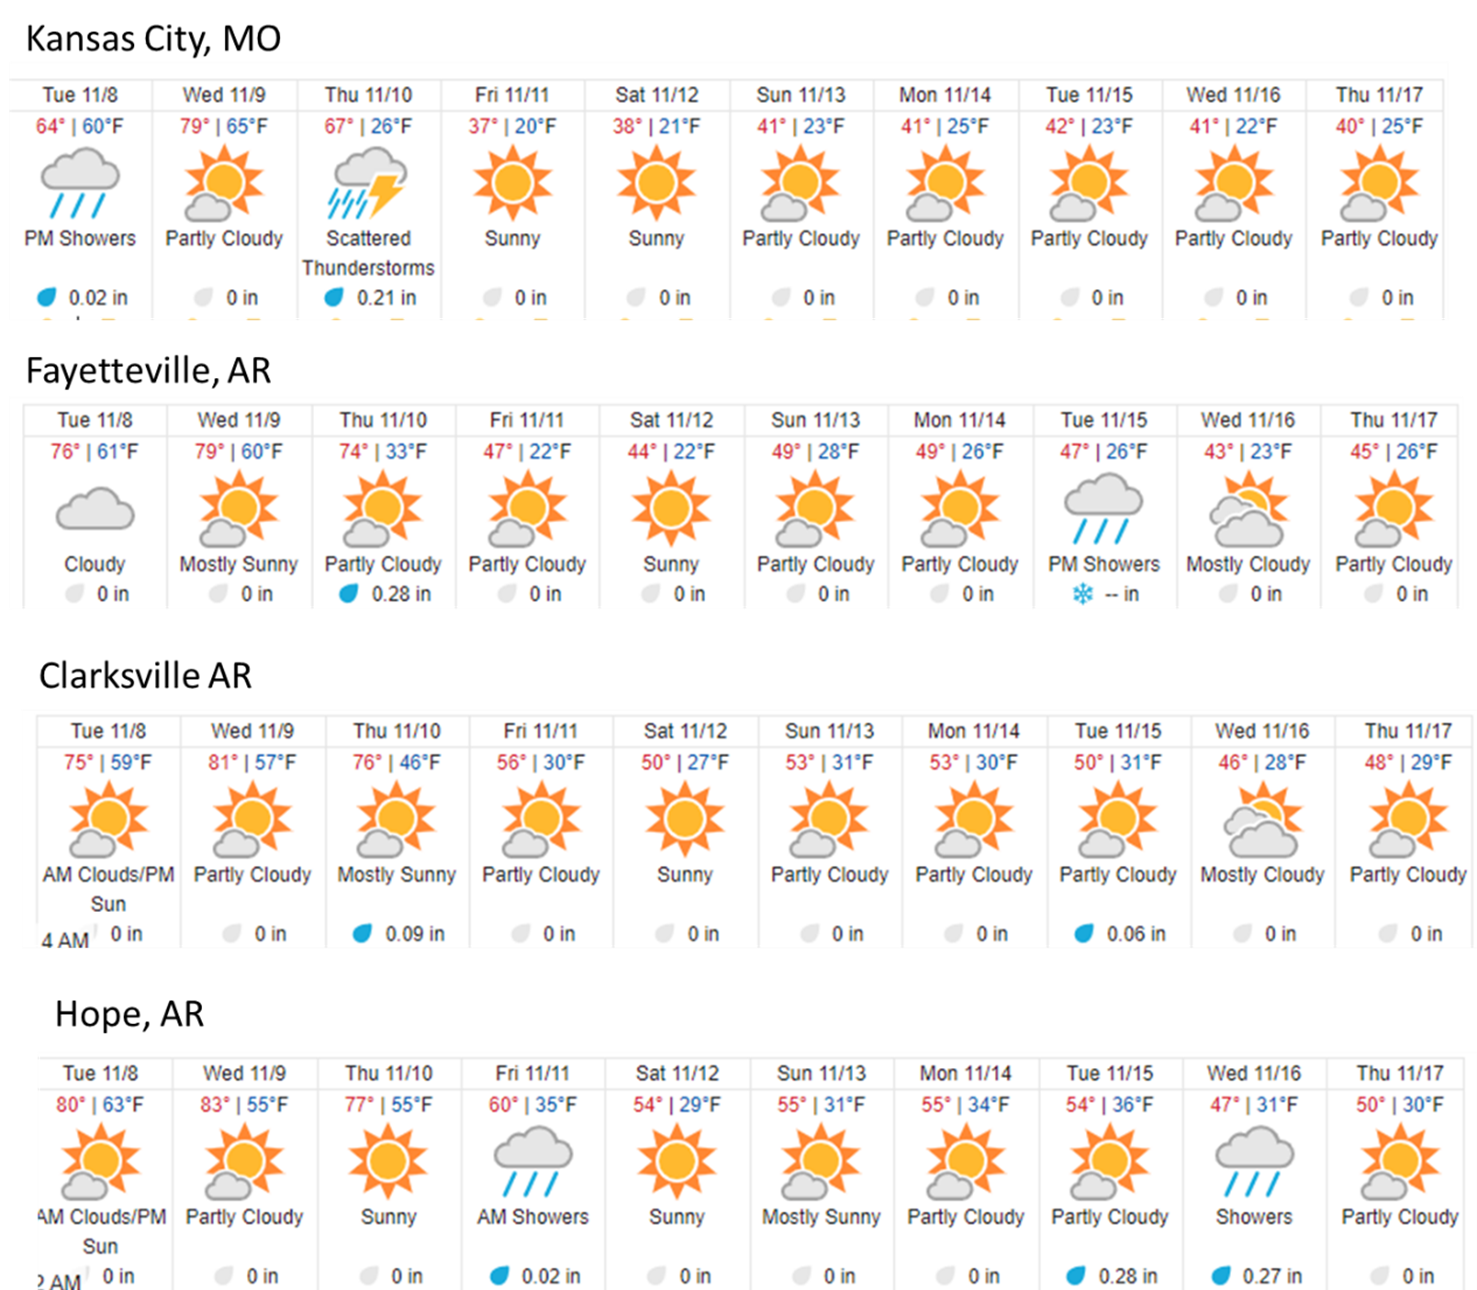 10 day forecast with high and low temperatures for Fayetteville, Clarksville, and Hope Arkansas and Kansas City Missouri. 